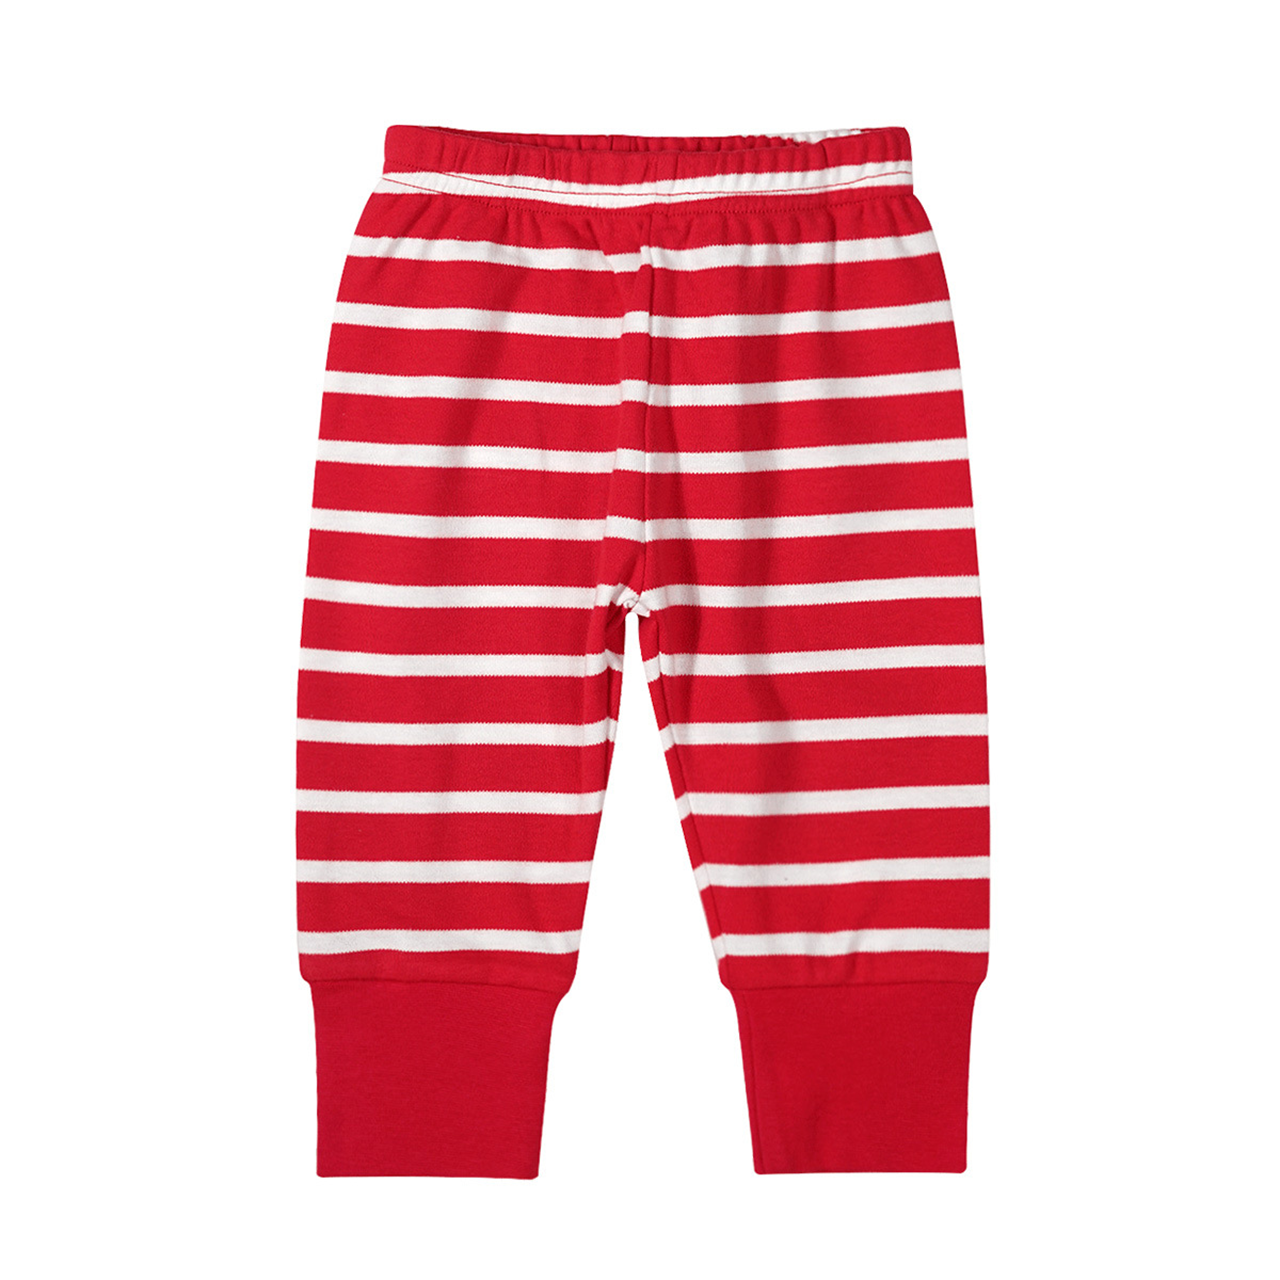 6 Colors Baby Striped Pants